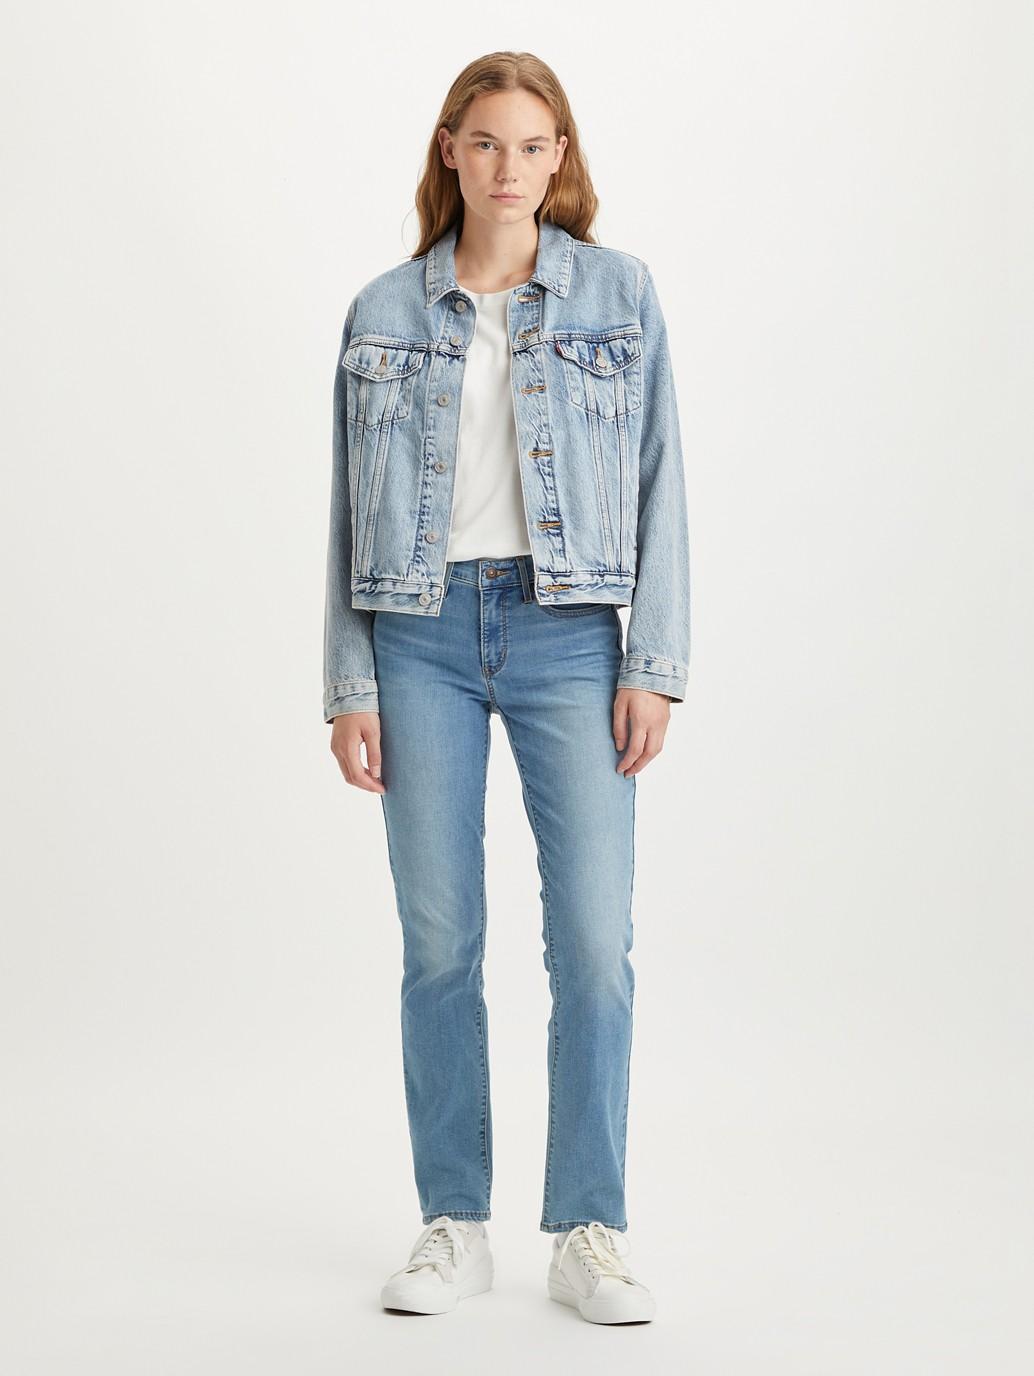 Levi's® Women's 312 Shaping Slim Jeans | Levi's® Official Online Store SG